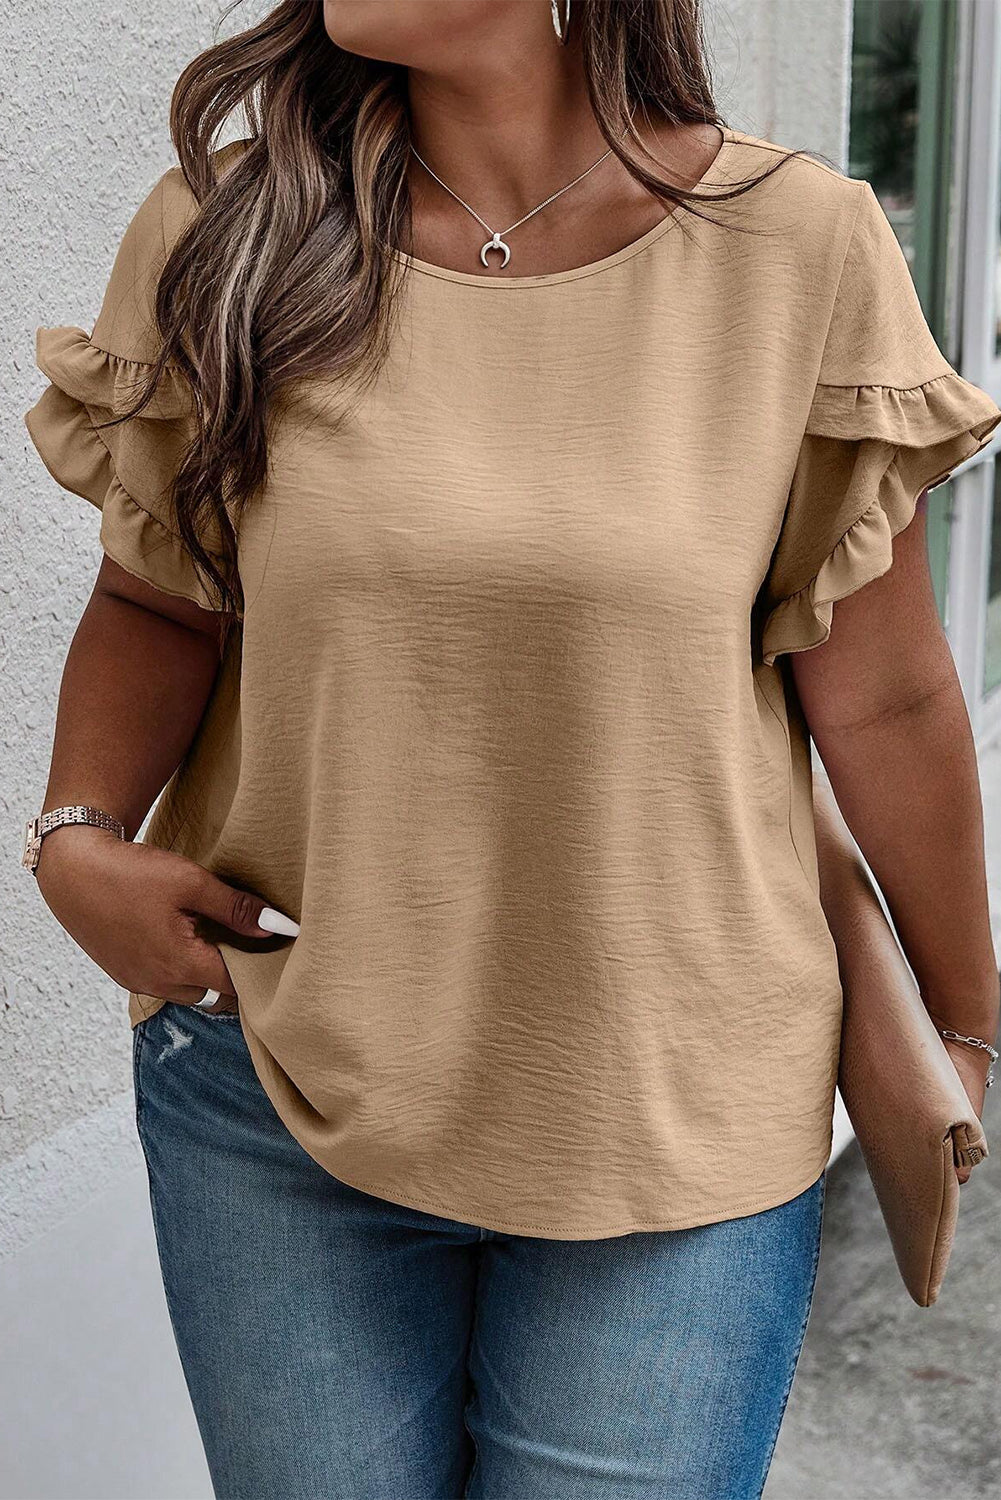 Plus Size Ruffled Petal Sleeve Round Neck Top Shirts & Tops Krazy Heart Designs Boutique Tan 1XL 